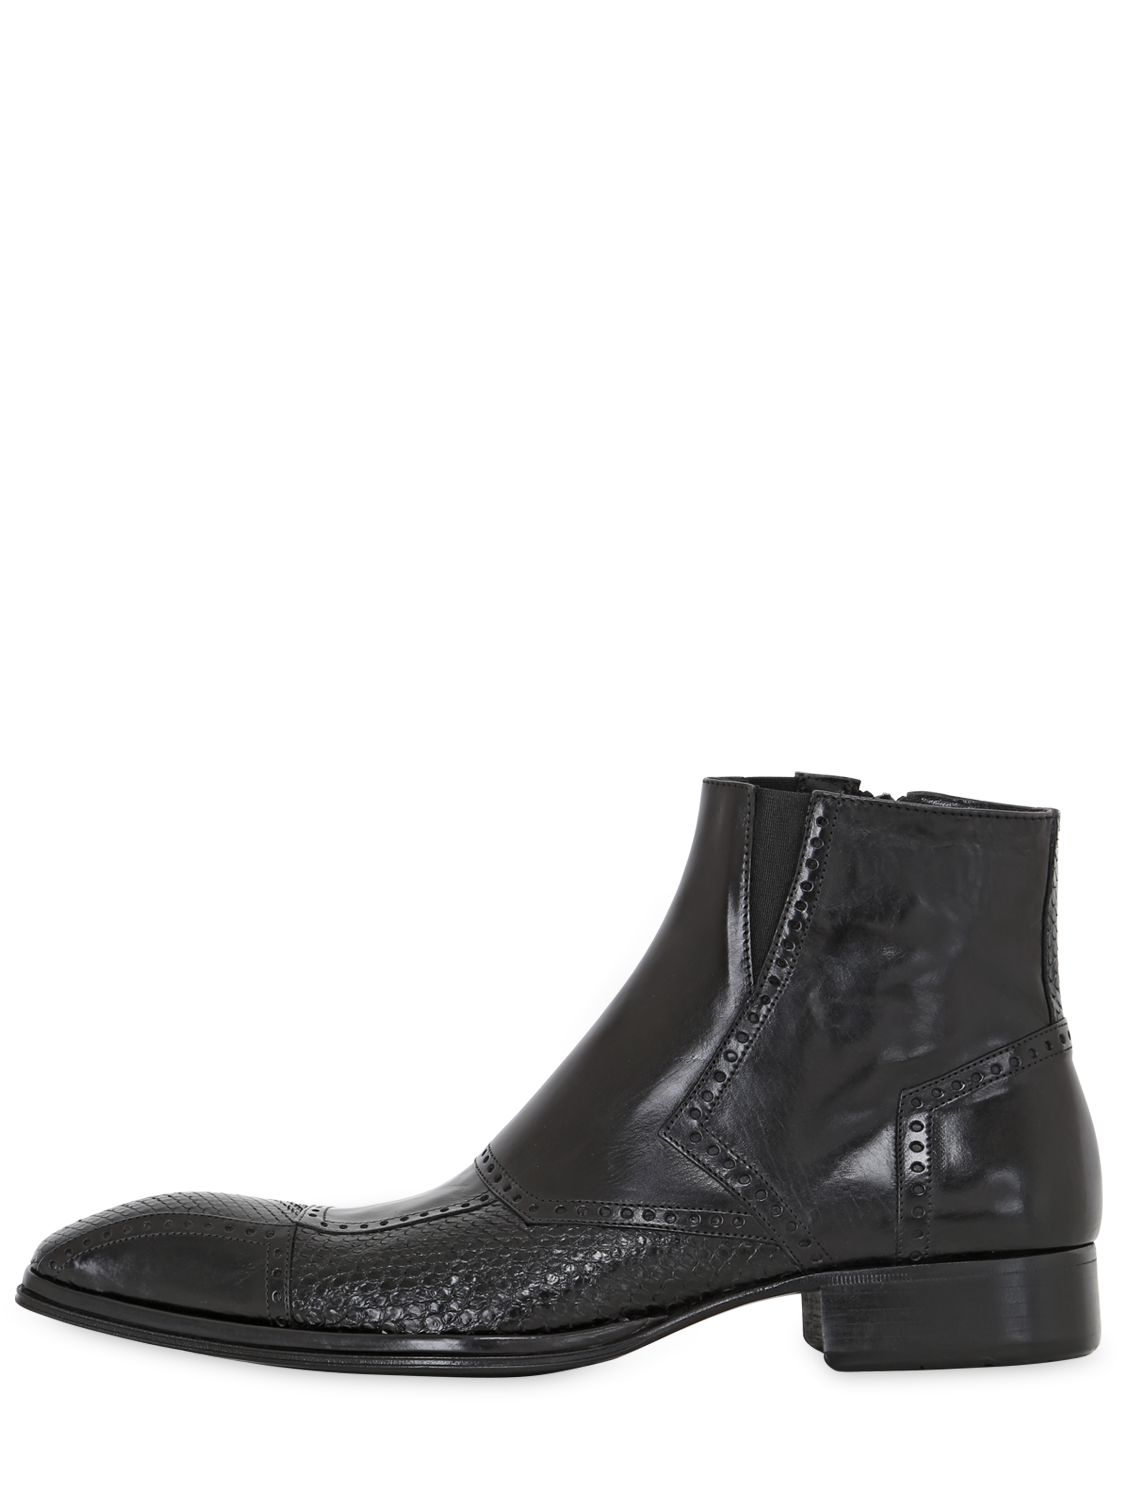 Jo ghost Handcrafted Leather & Python Boots in Black for Men | Lyst